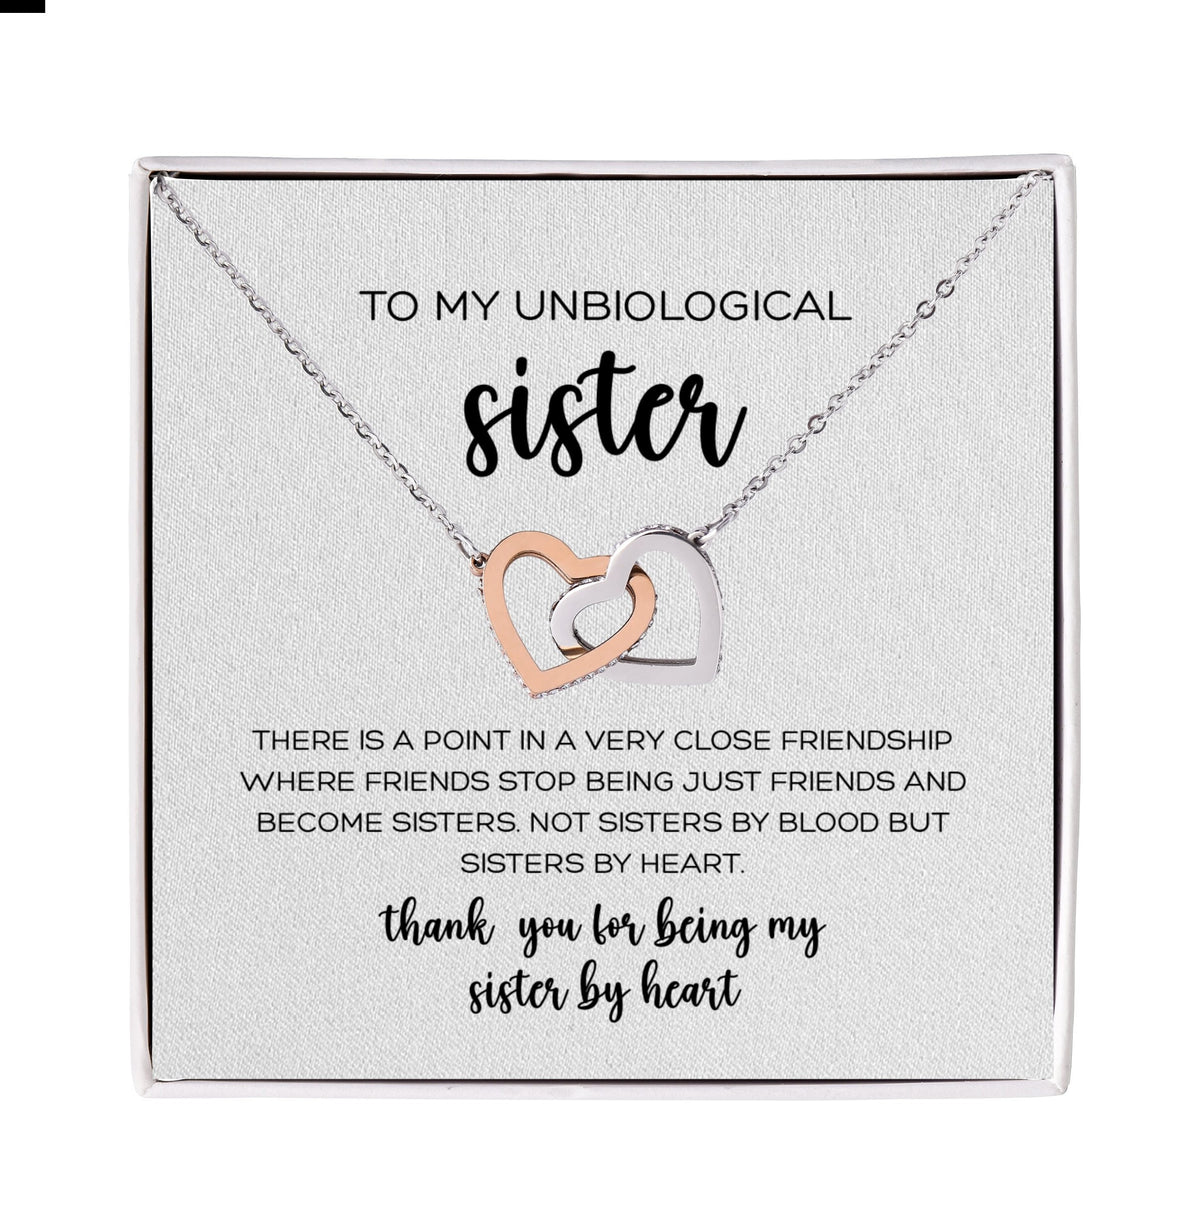 Unbiological Sister Necklace - Gift for Soul Sister Friendship Jewelry